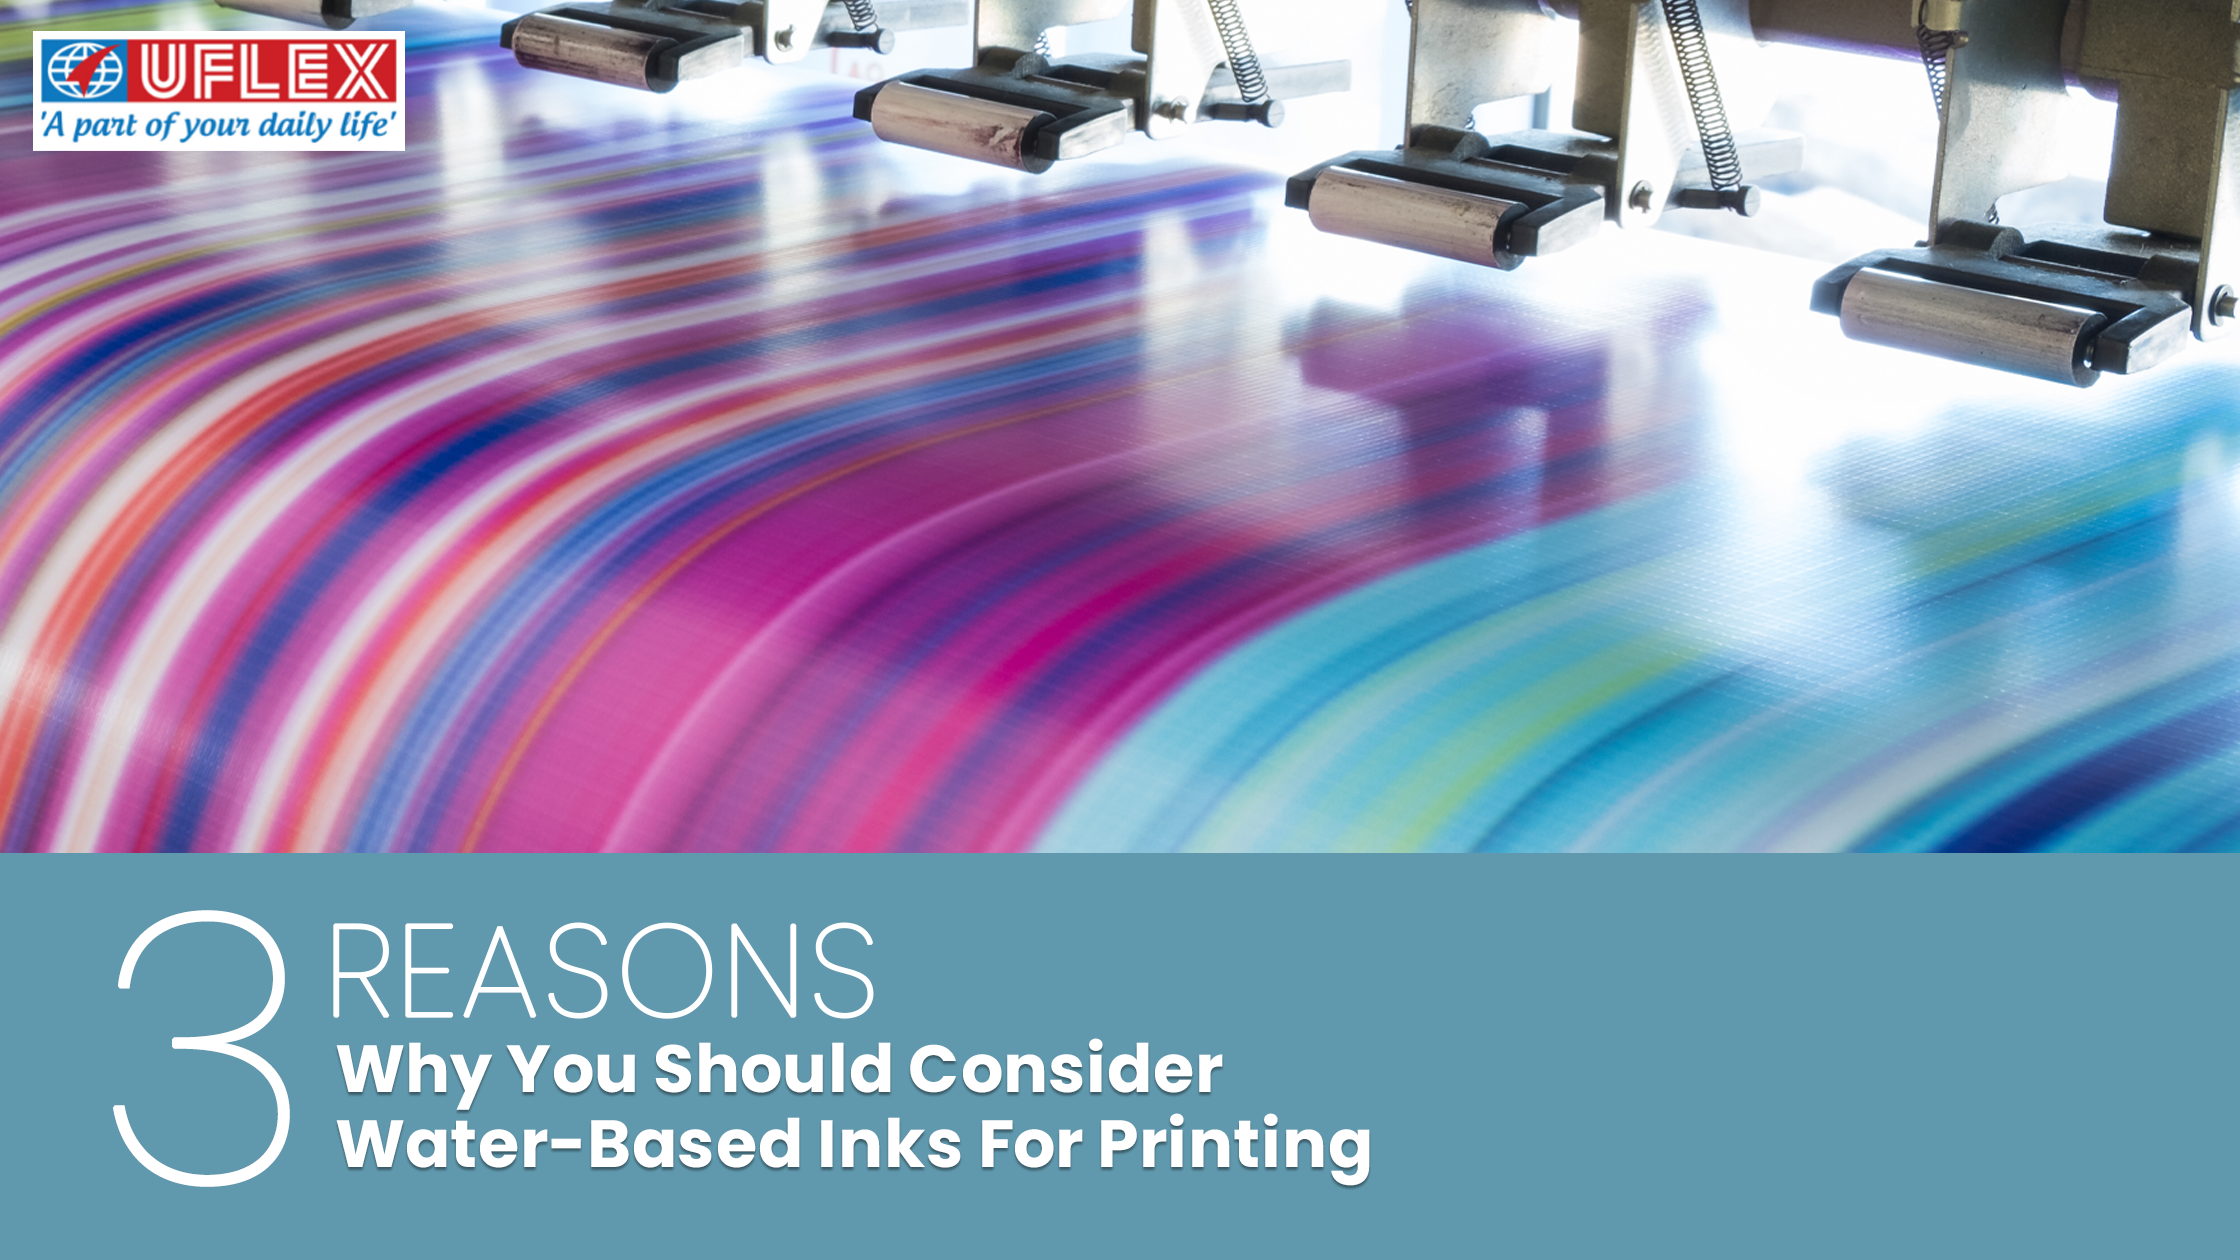 3 Reasons Why You Should Consider Water-Based Inks For Printing